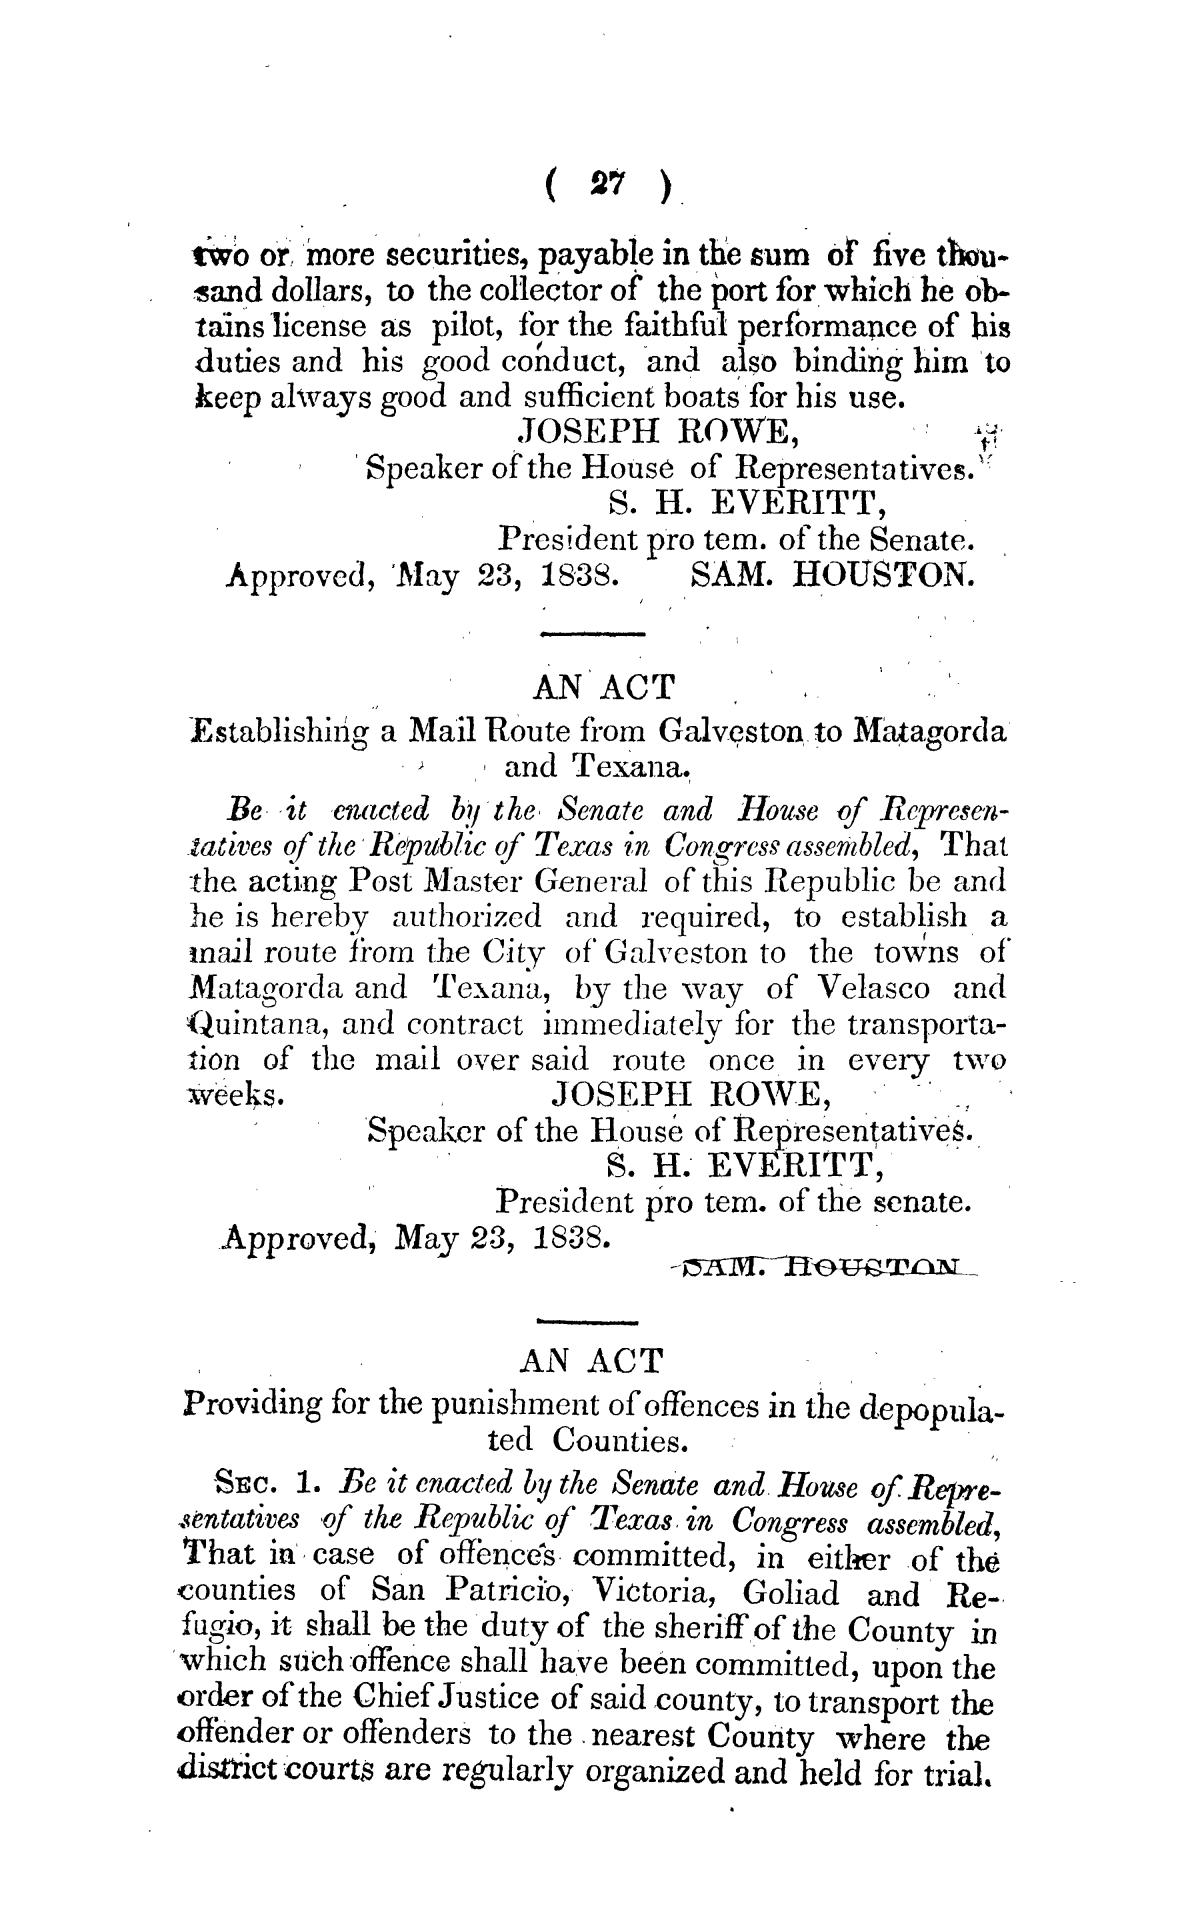 Laws of the Republic of Texas.  Volume Third.
                                                
                                                    27
                                                